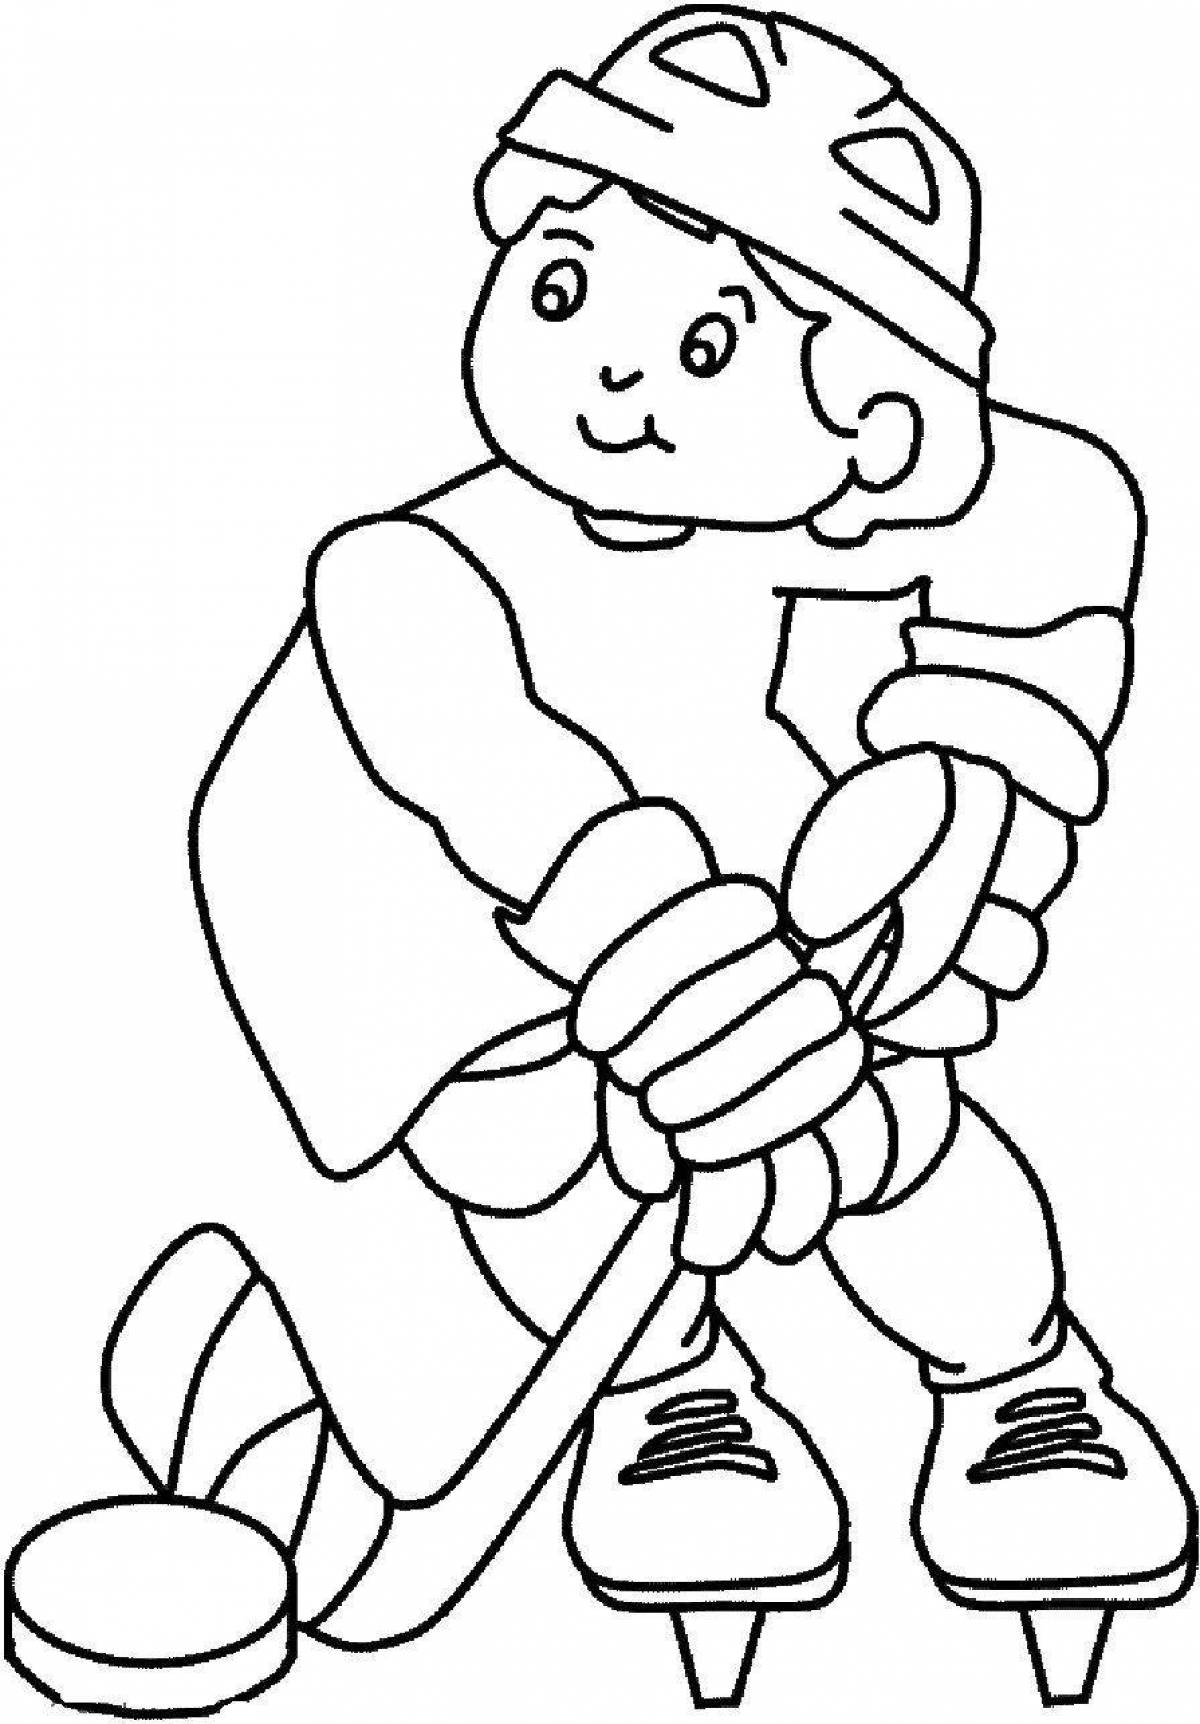 Amazing winter sports coloring page for preschoolers